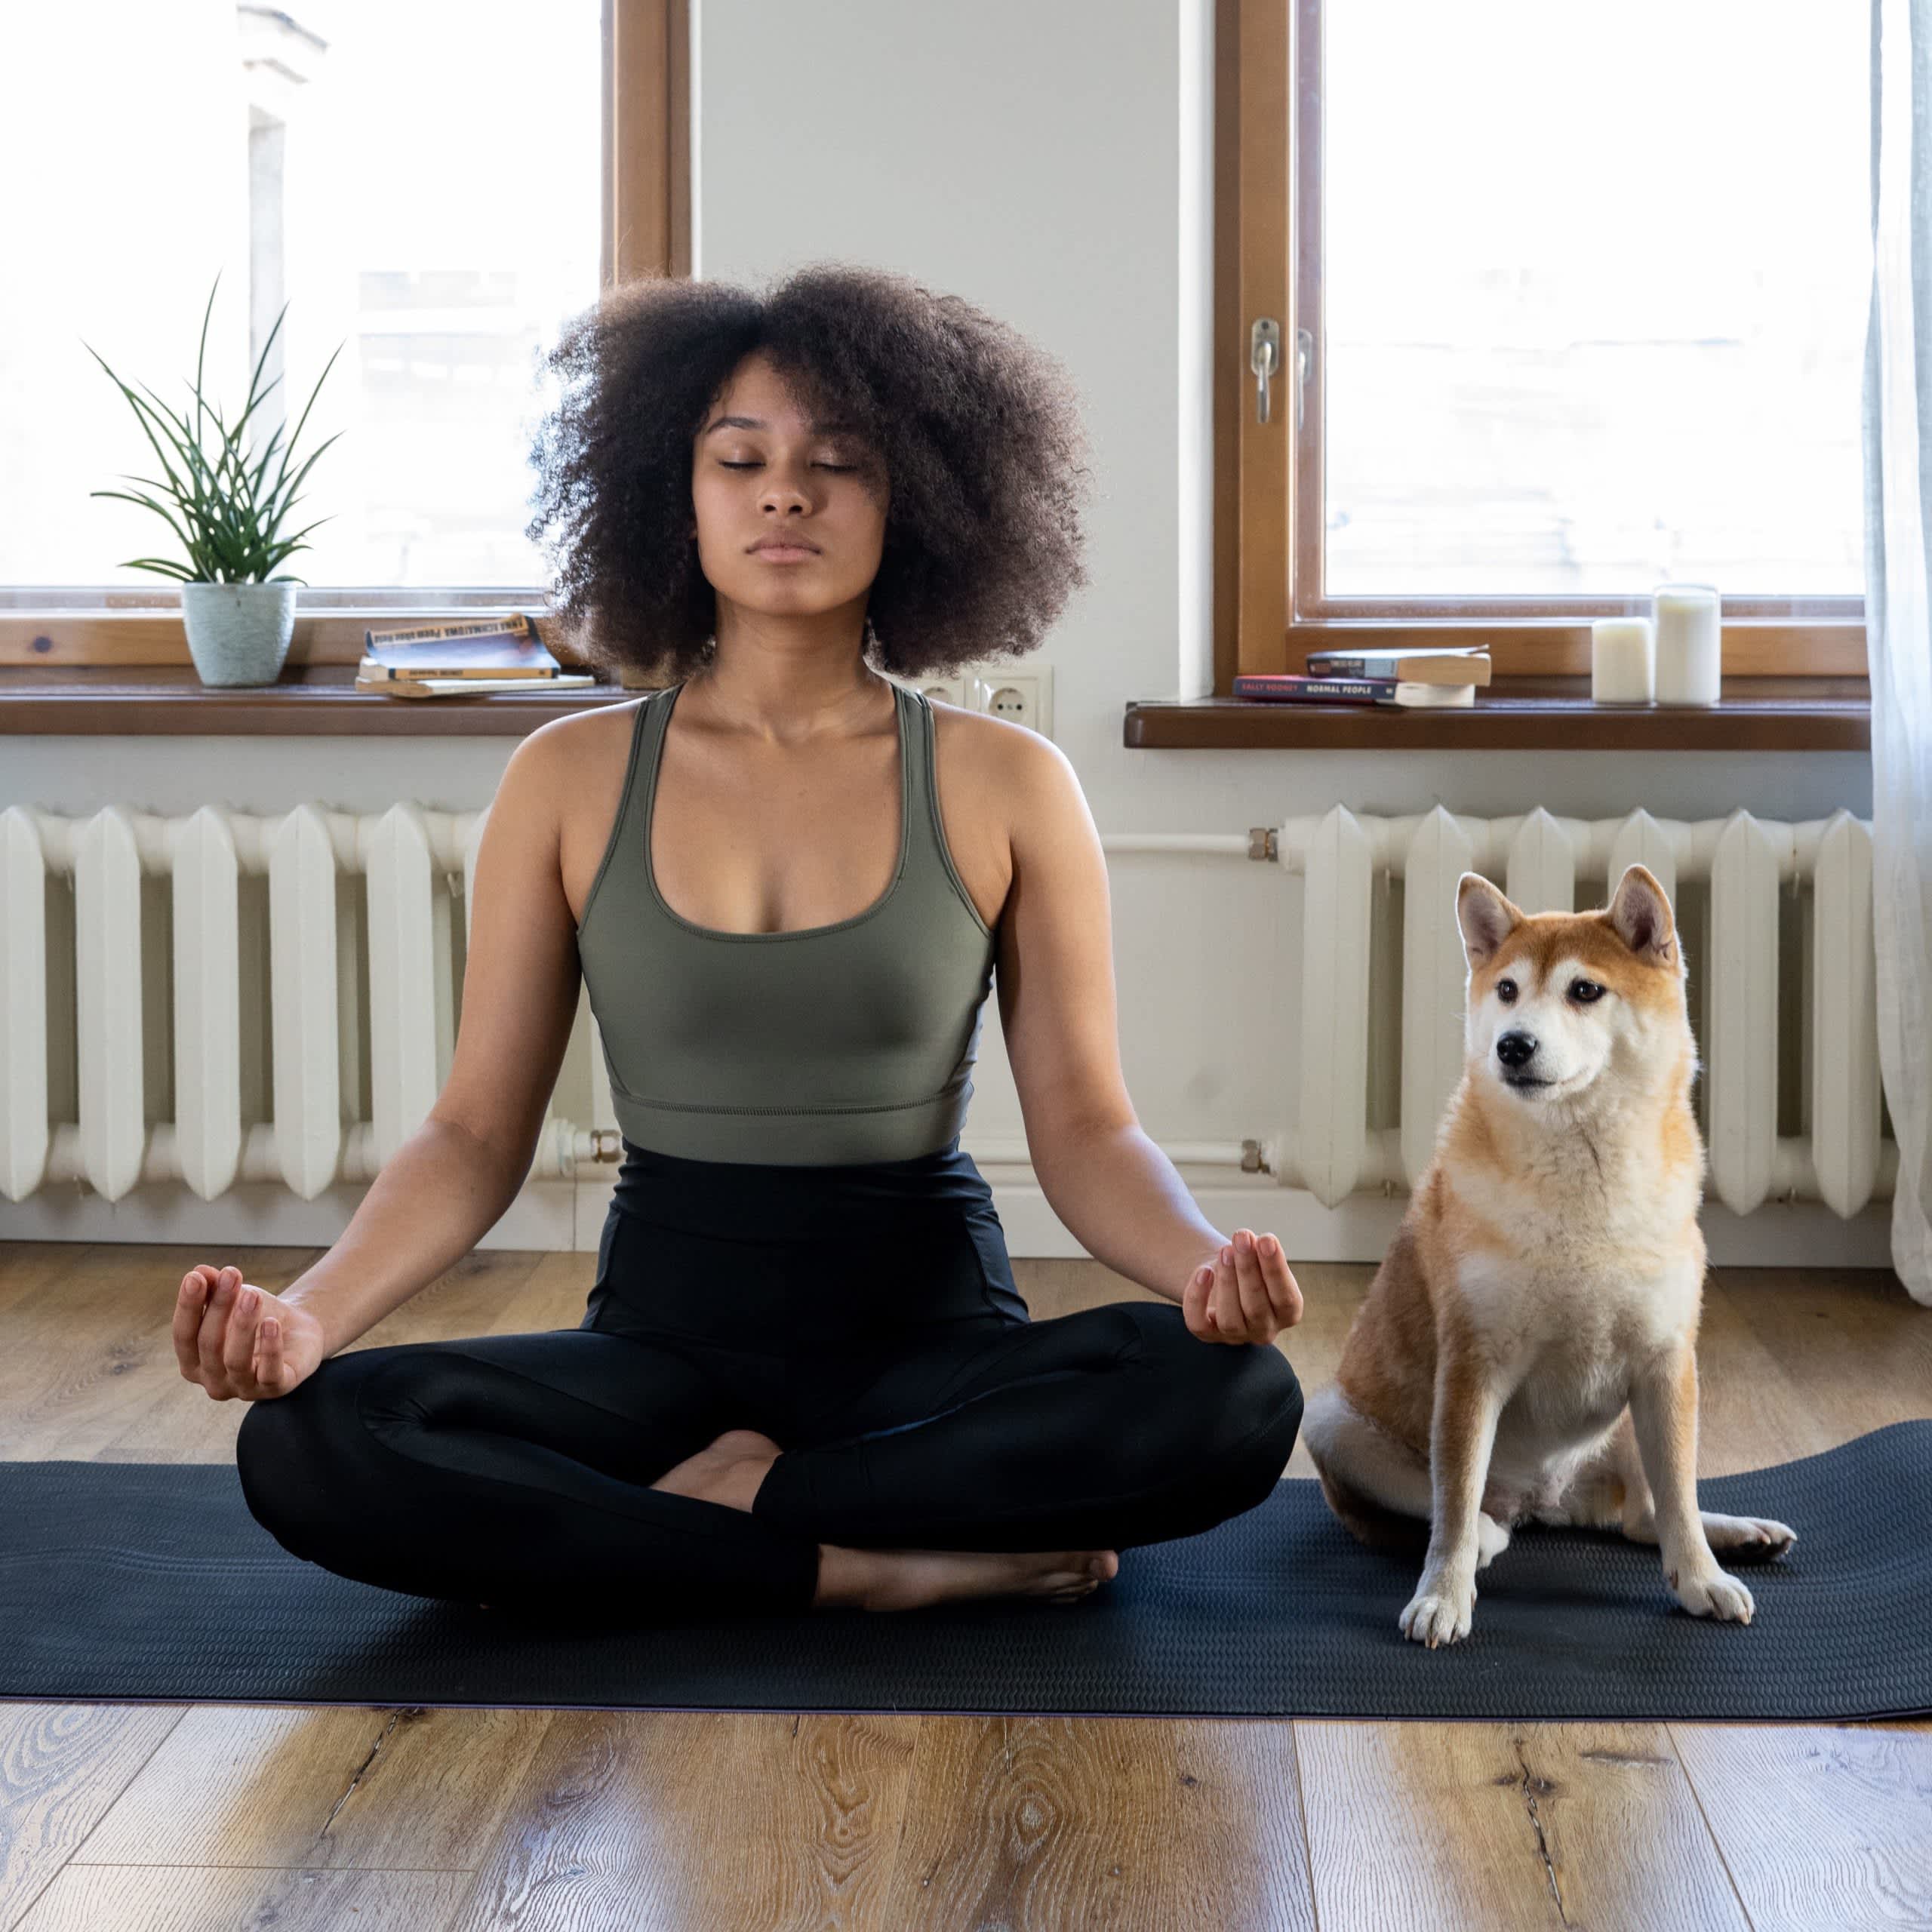 A woman in a yoga meditation pose in her house, next to her dog